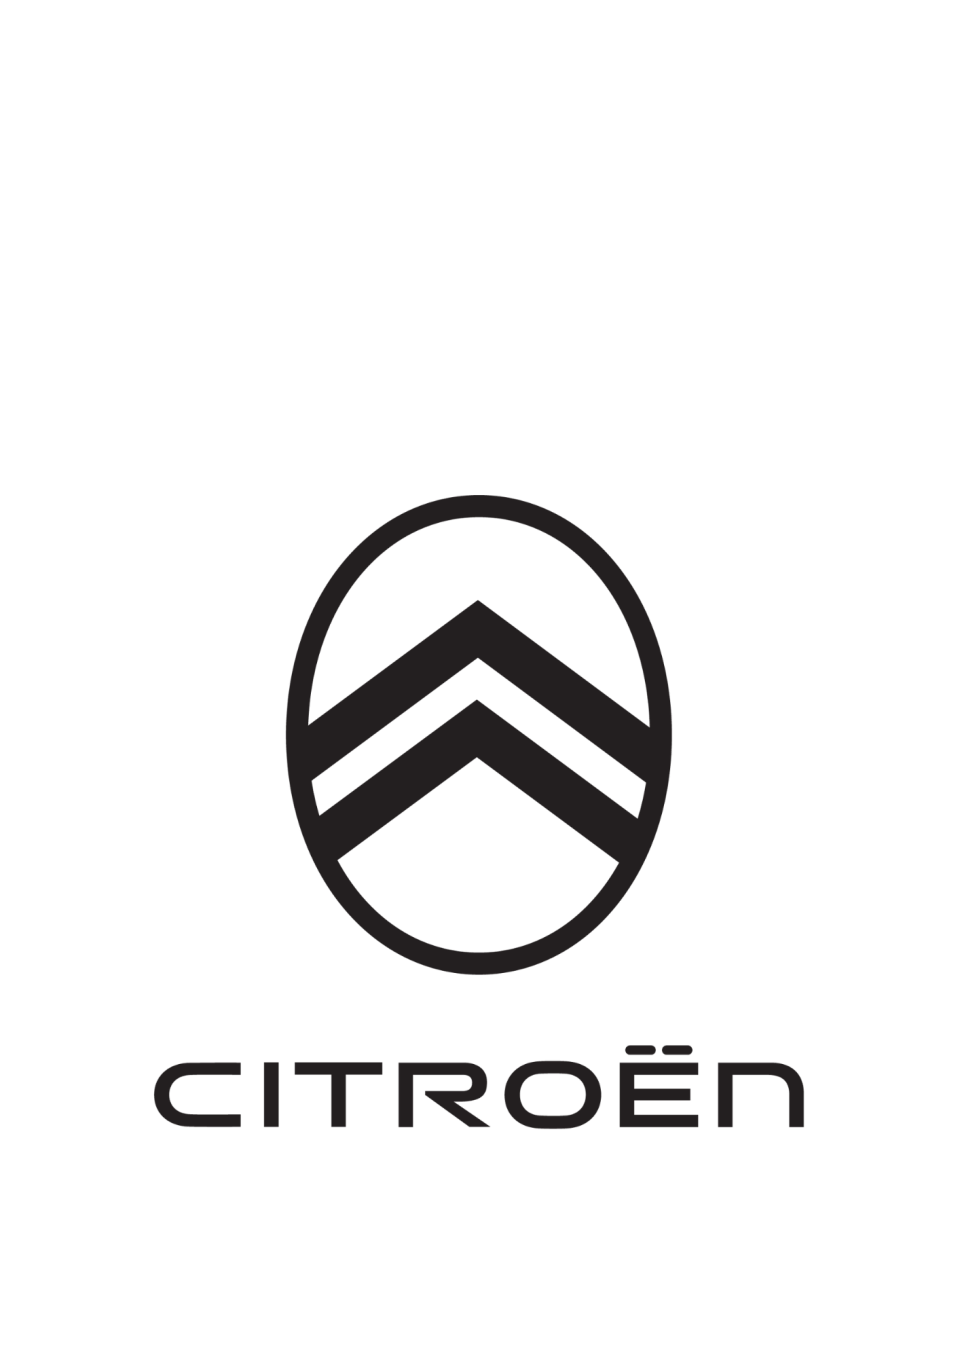 Citroën: implementing the famed French automotive brand across the world